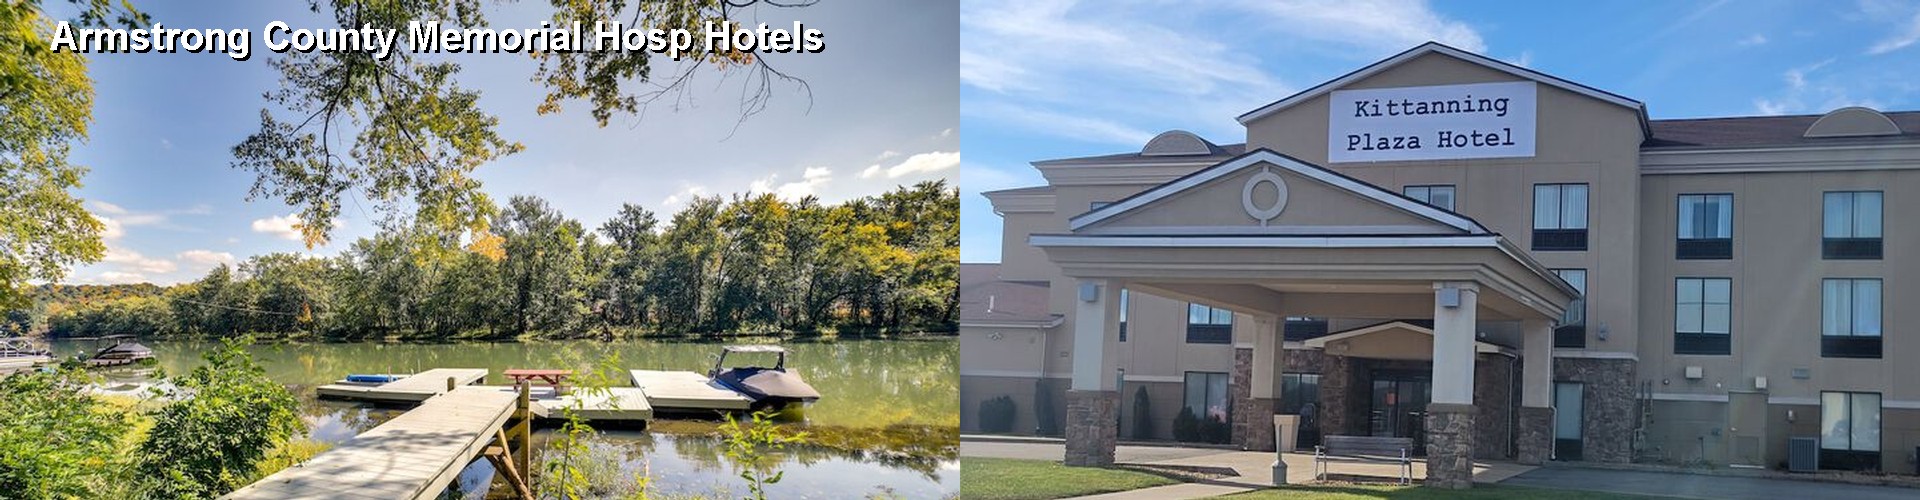 5 Best Hotels near Armstrong County Memorial Hosp